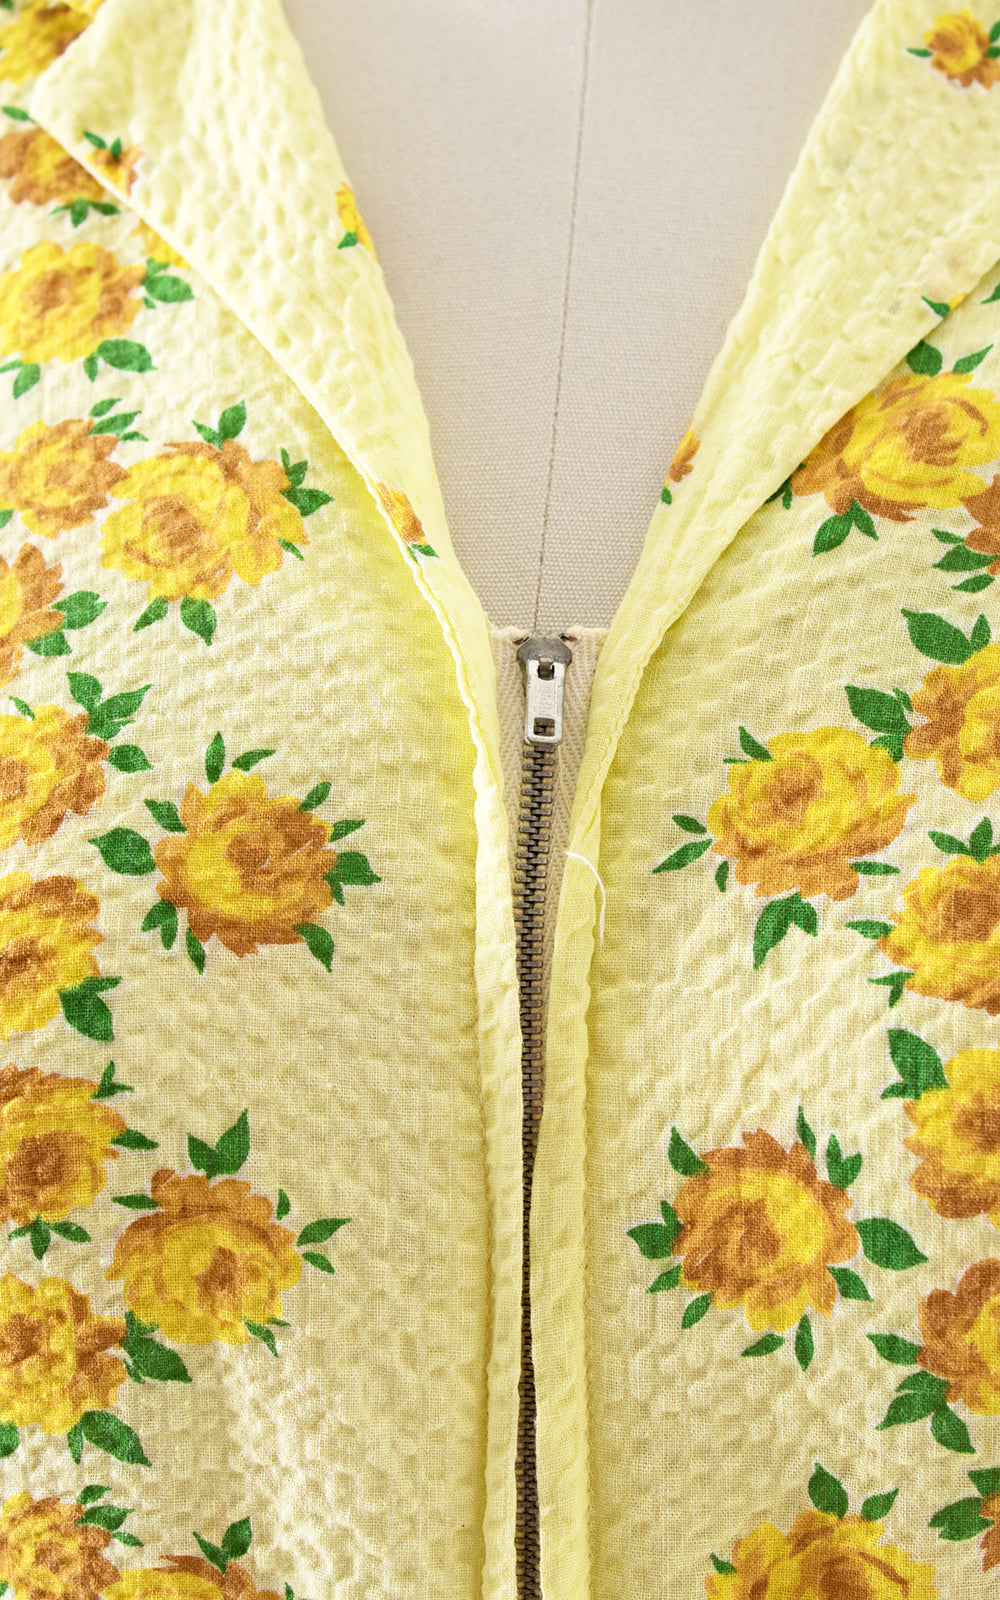 1940s Yellow Rose Dressing Gown